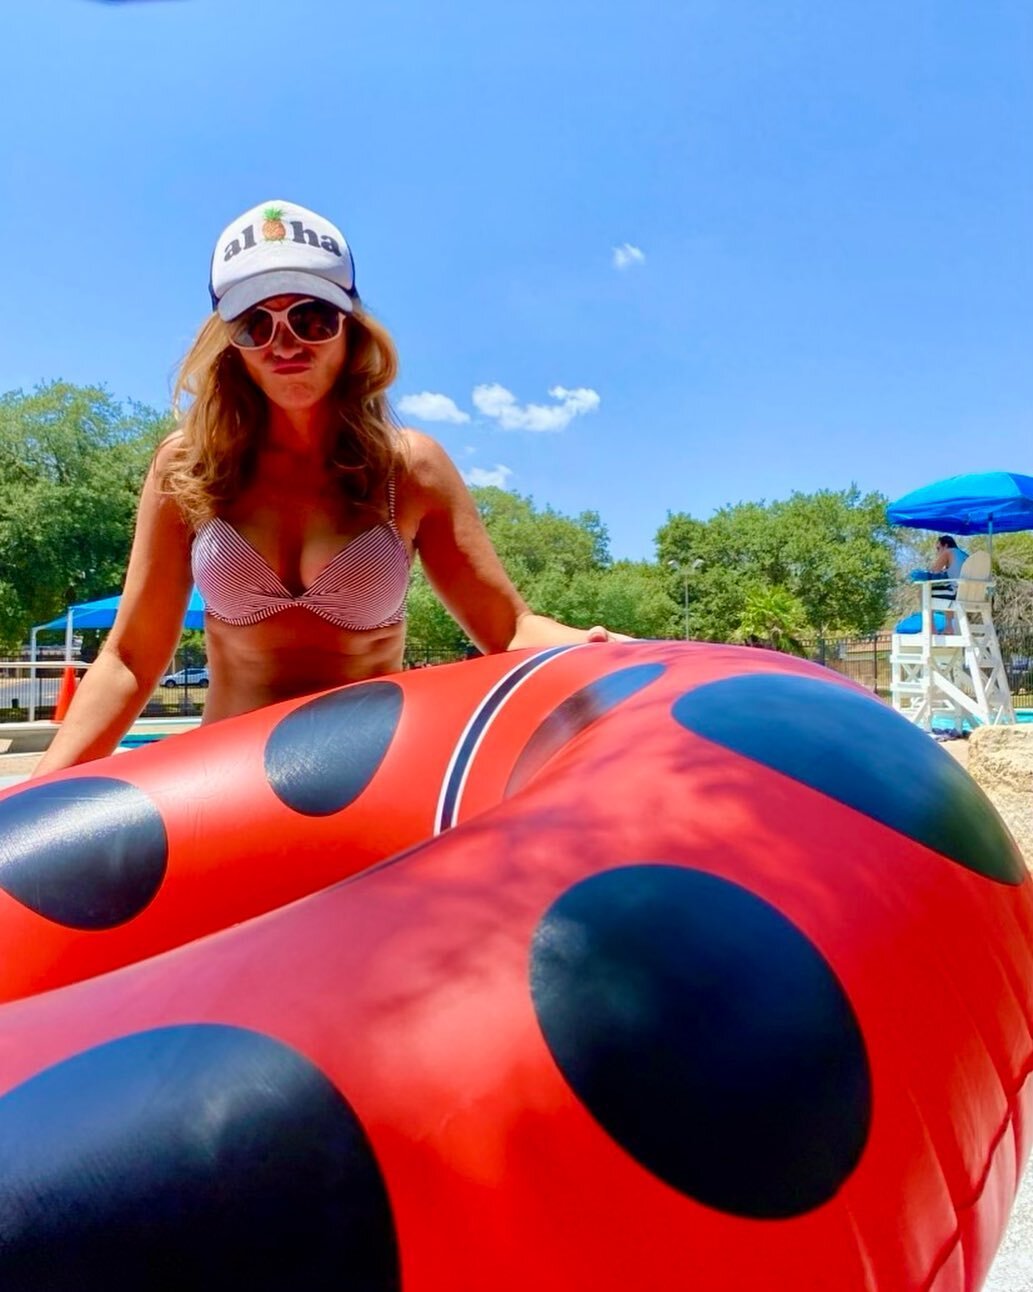 Lady bugs a symbol of good luck and good fortune and in this case additional buffoonery. #goodluck #laborday #austin #ladybug #raft #joyous #af #eatyourheartout #dangerfield